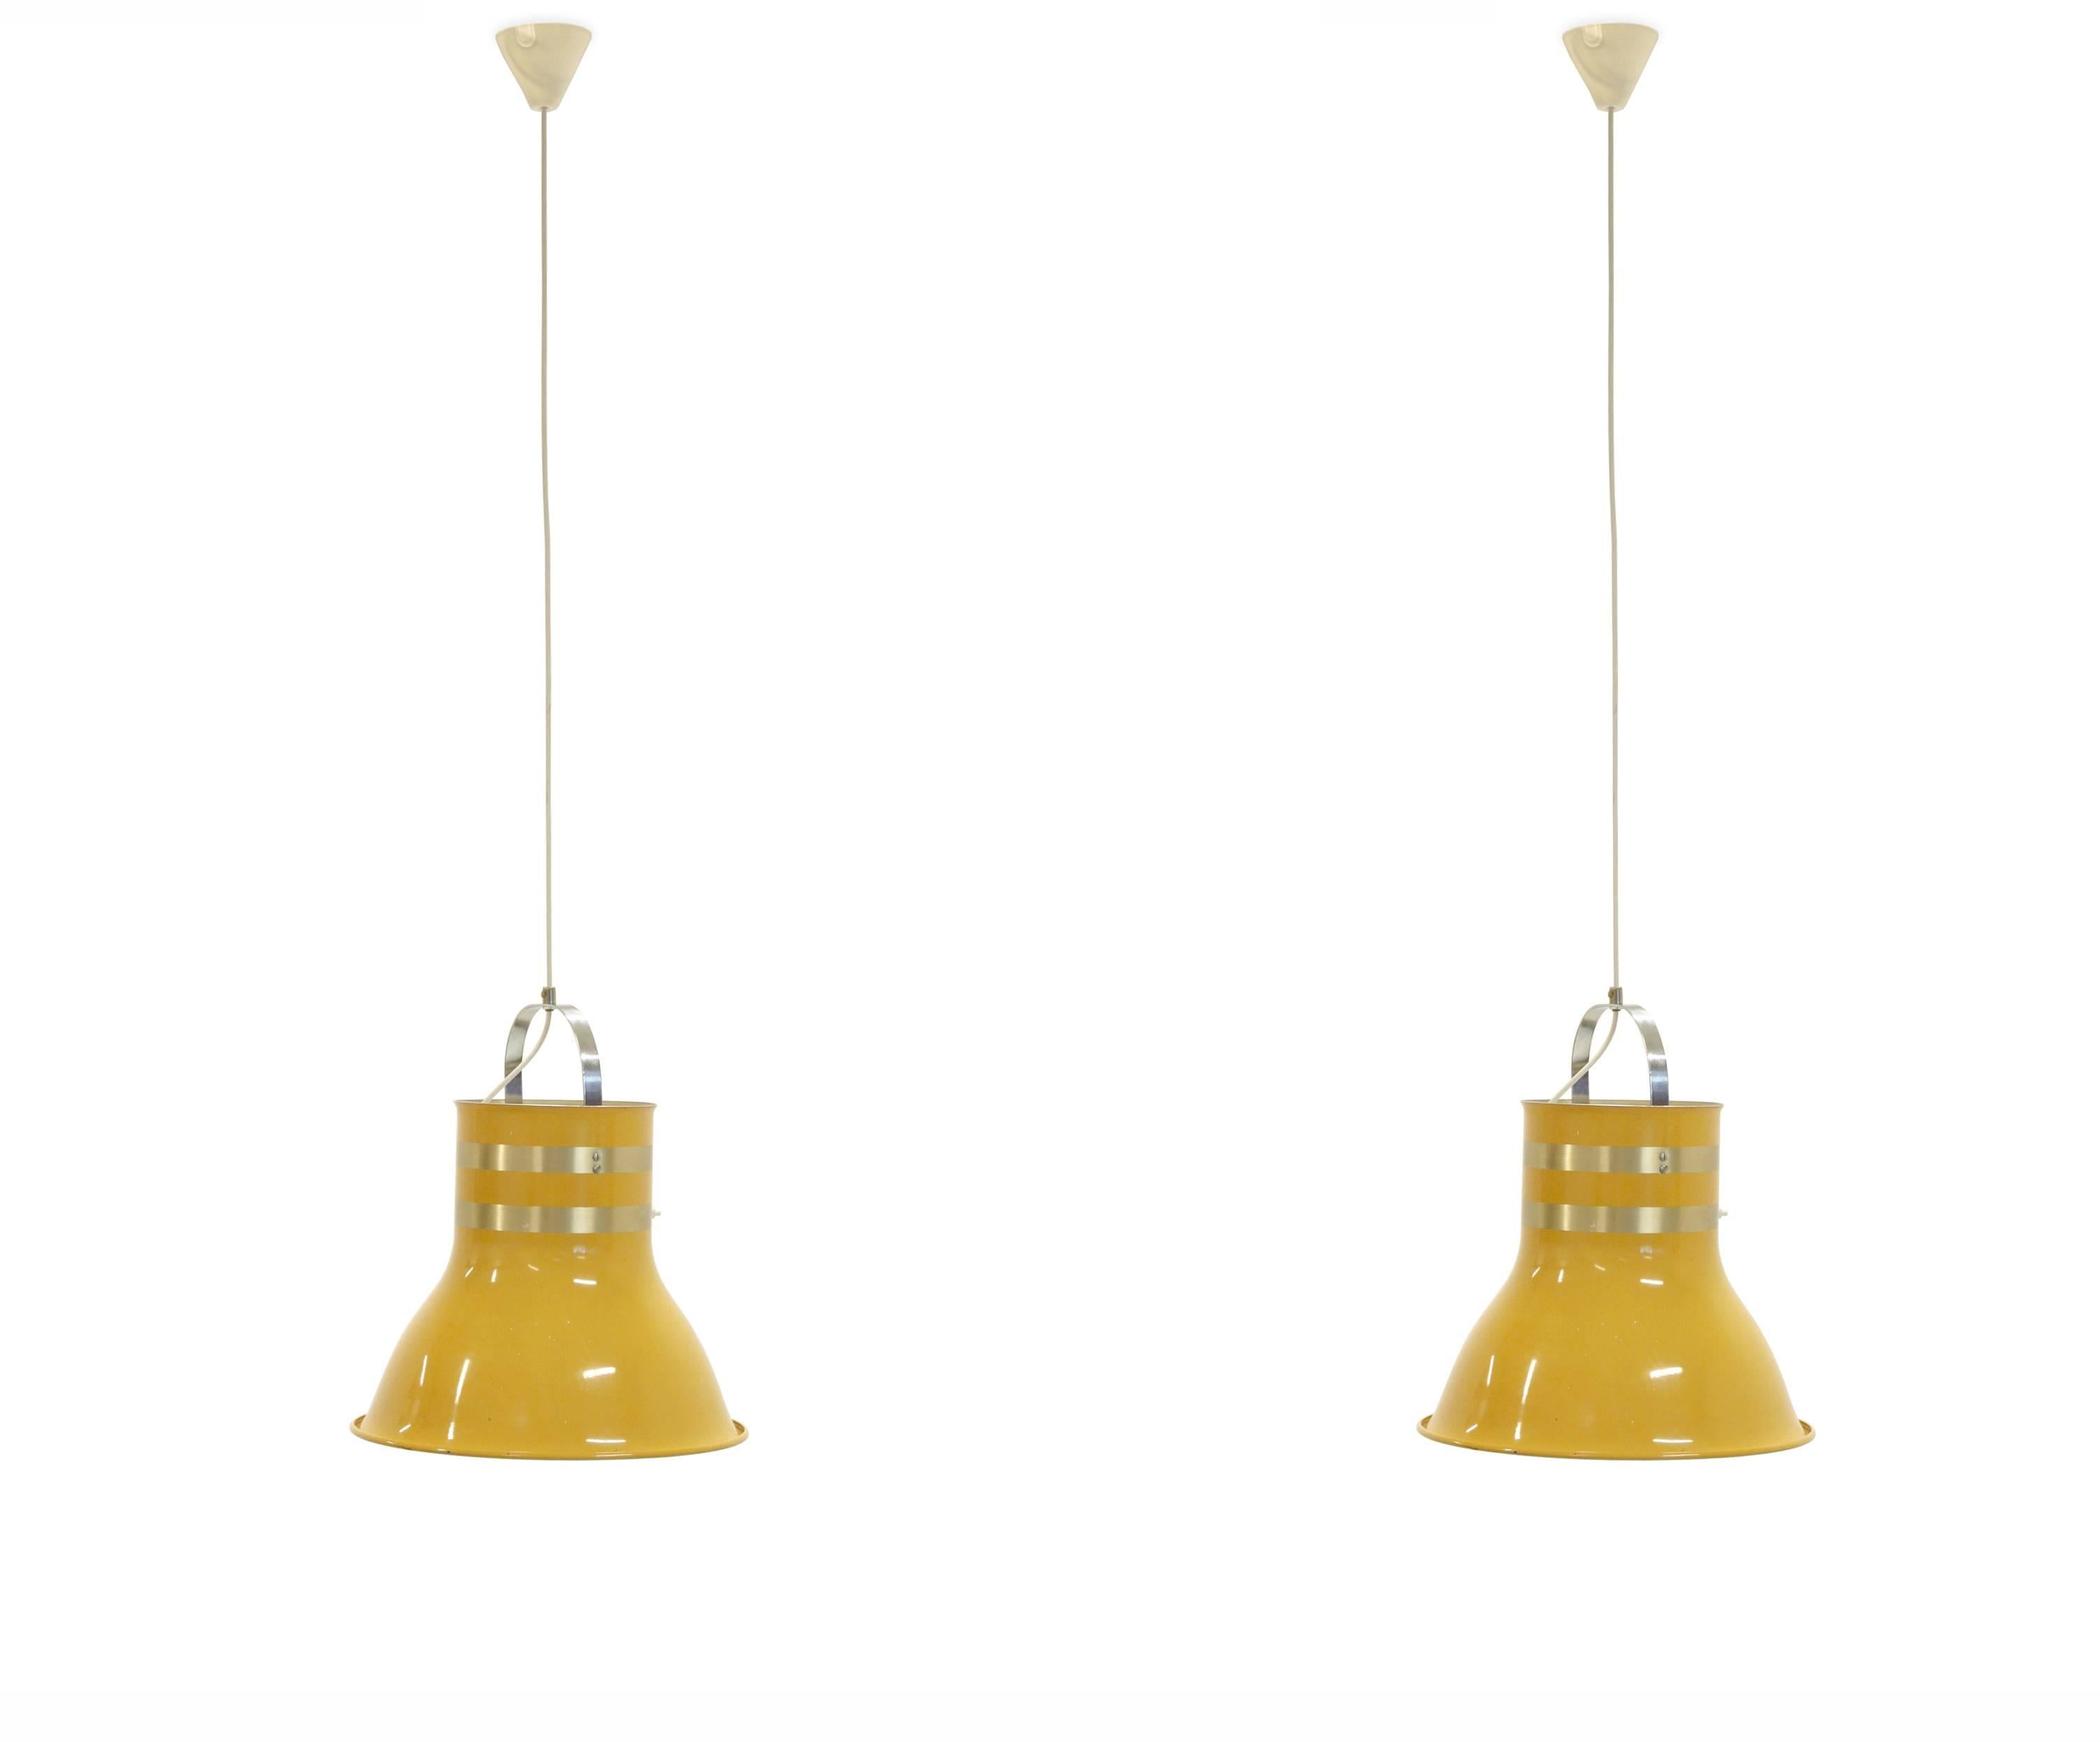 Mid-Century Modern Pair of Swedish Ceiling Lights by Per Sundstedt for Kosta, 1970s